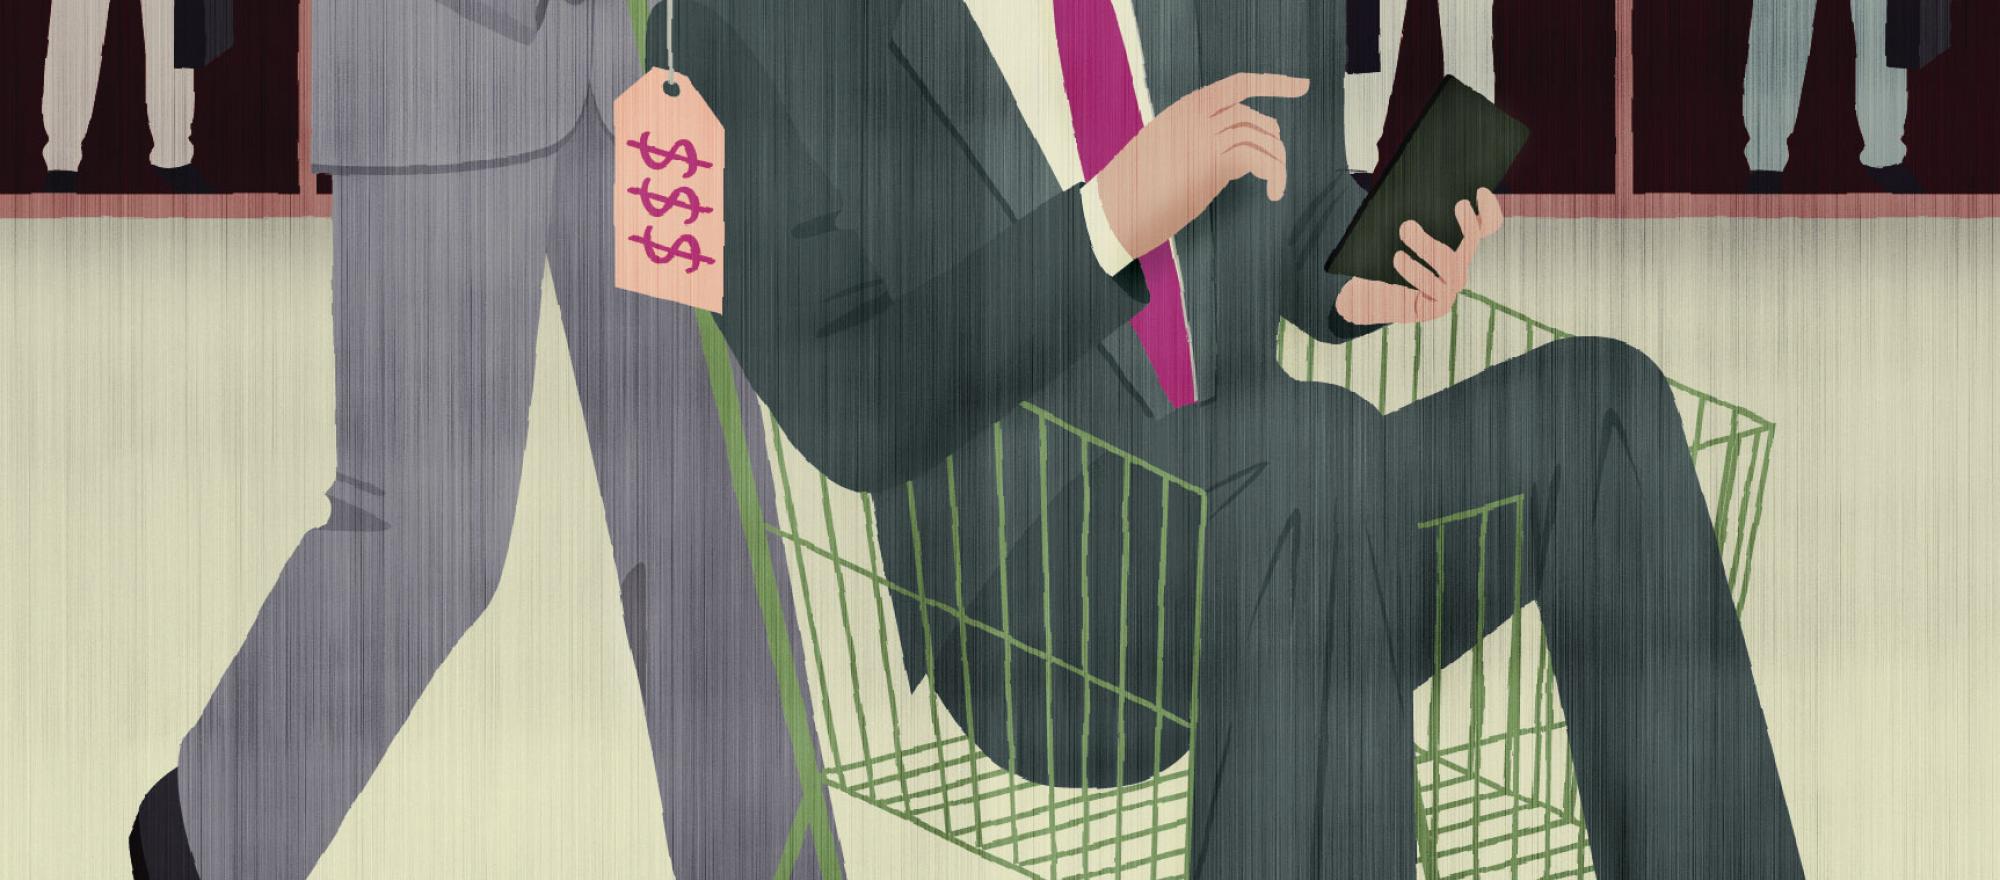 A good financial adviser can add significantly to your wealth. (Illustration: John T. Lewis)